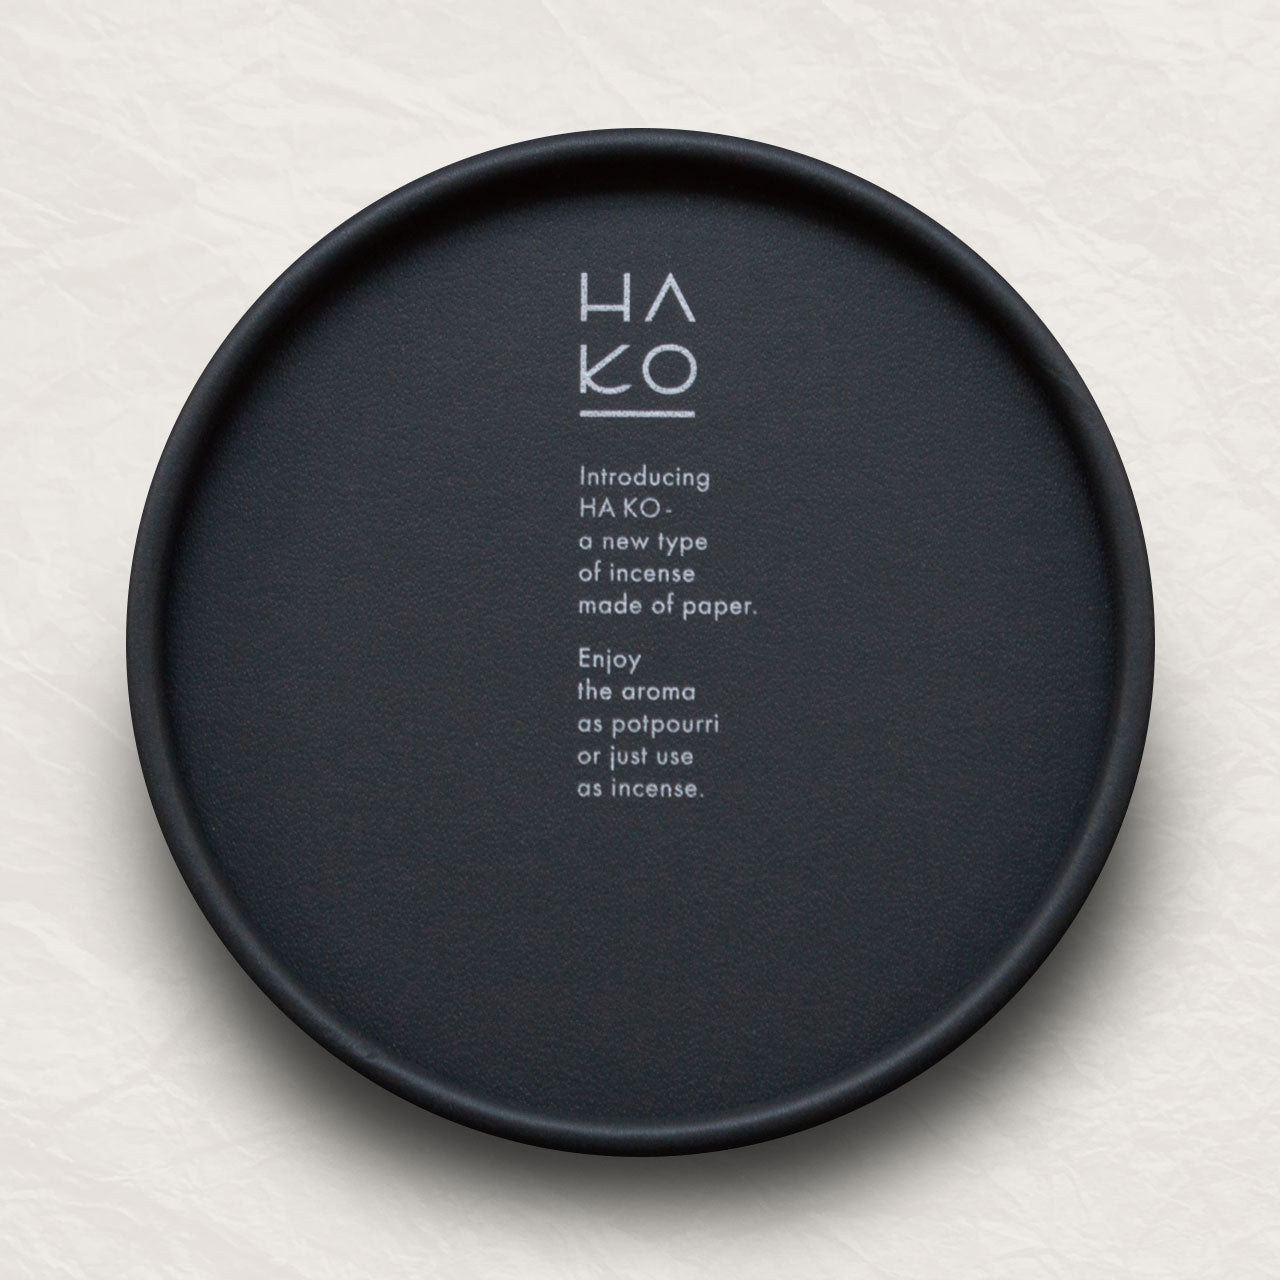 Black circular container with white lettering describing the incense inside